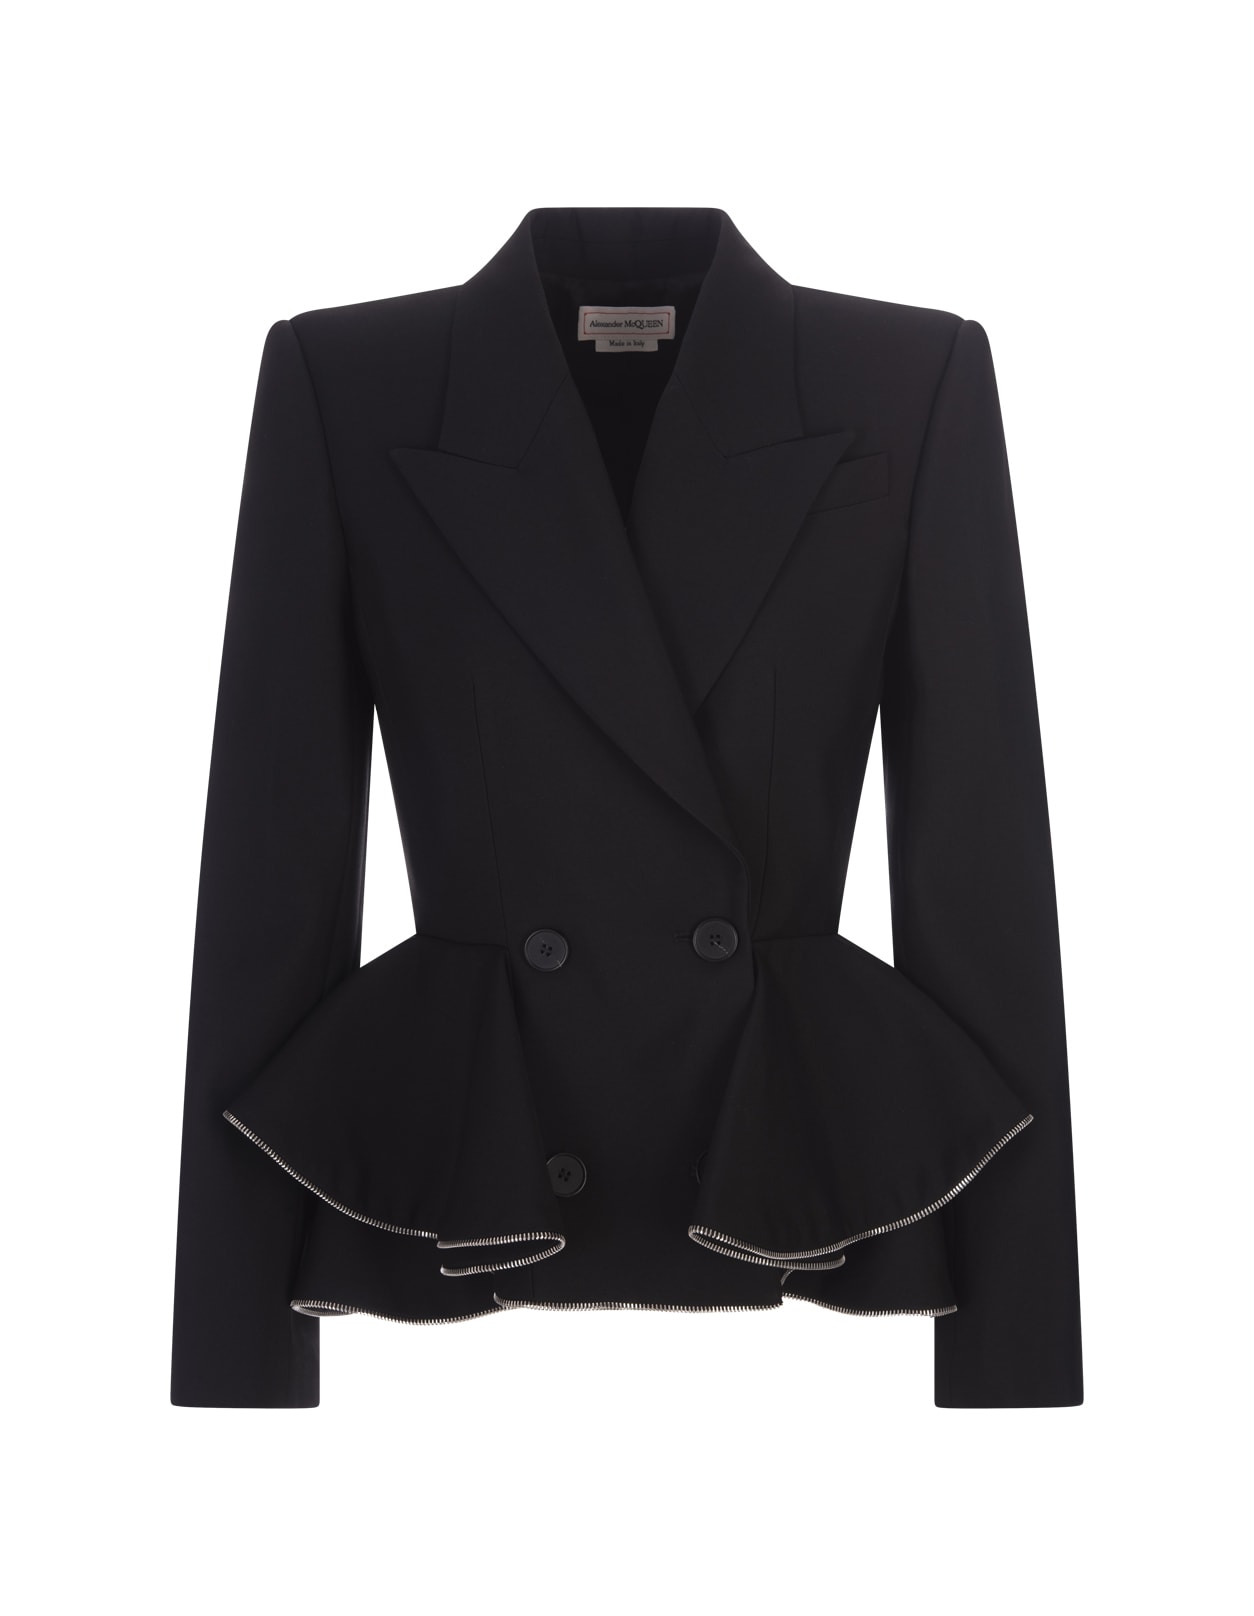 ALEXANDER MCQUEEN BLACK DOUBLE-BREASTED JACKET WITH RUFFLES AND ZIP